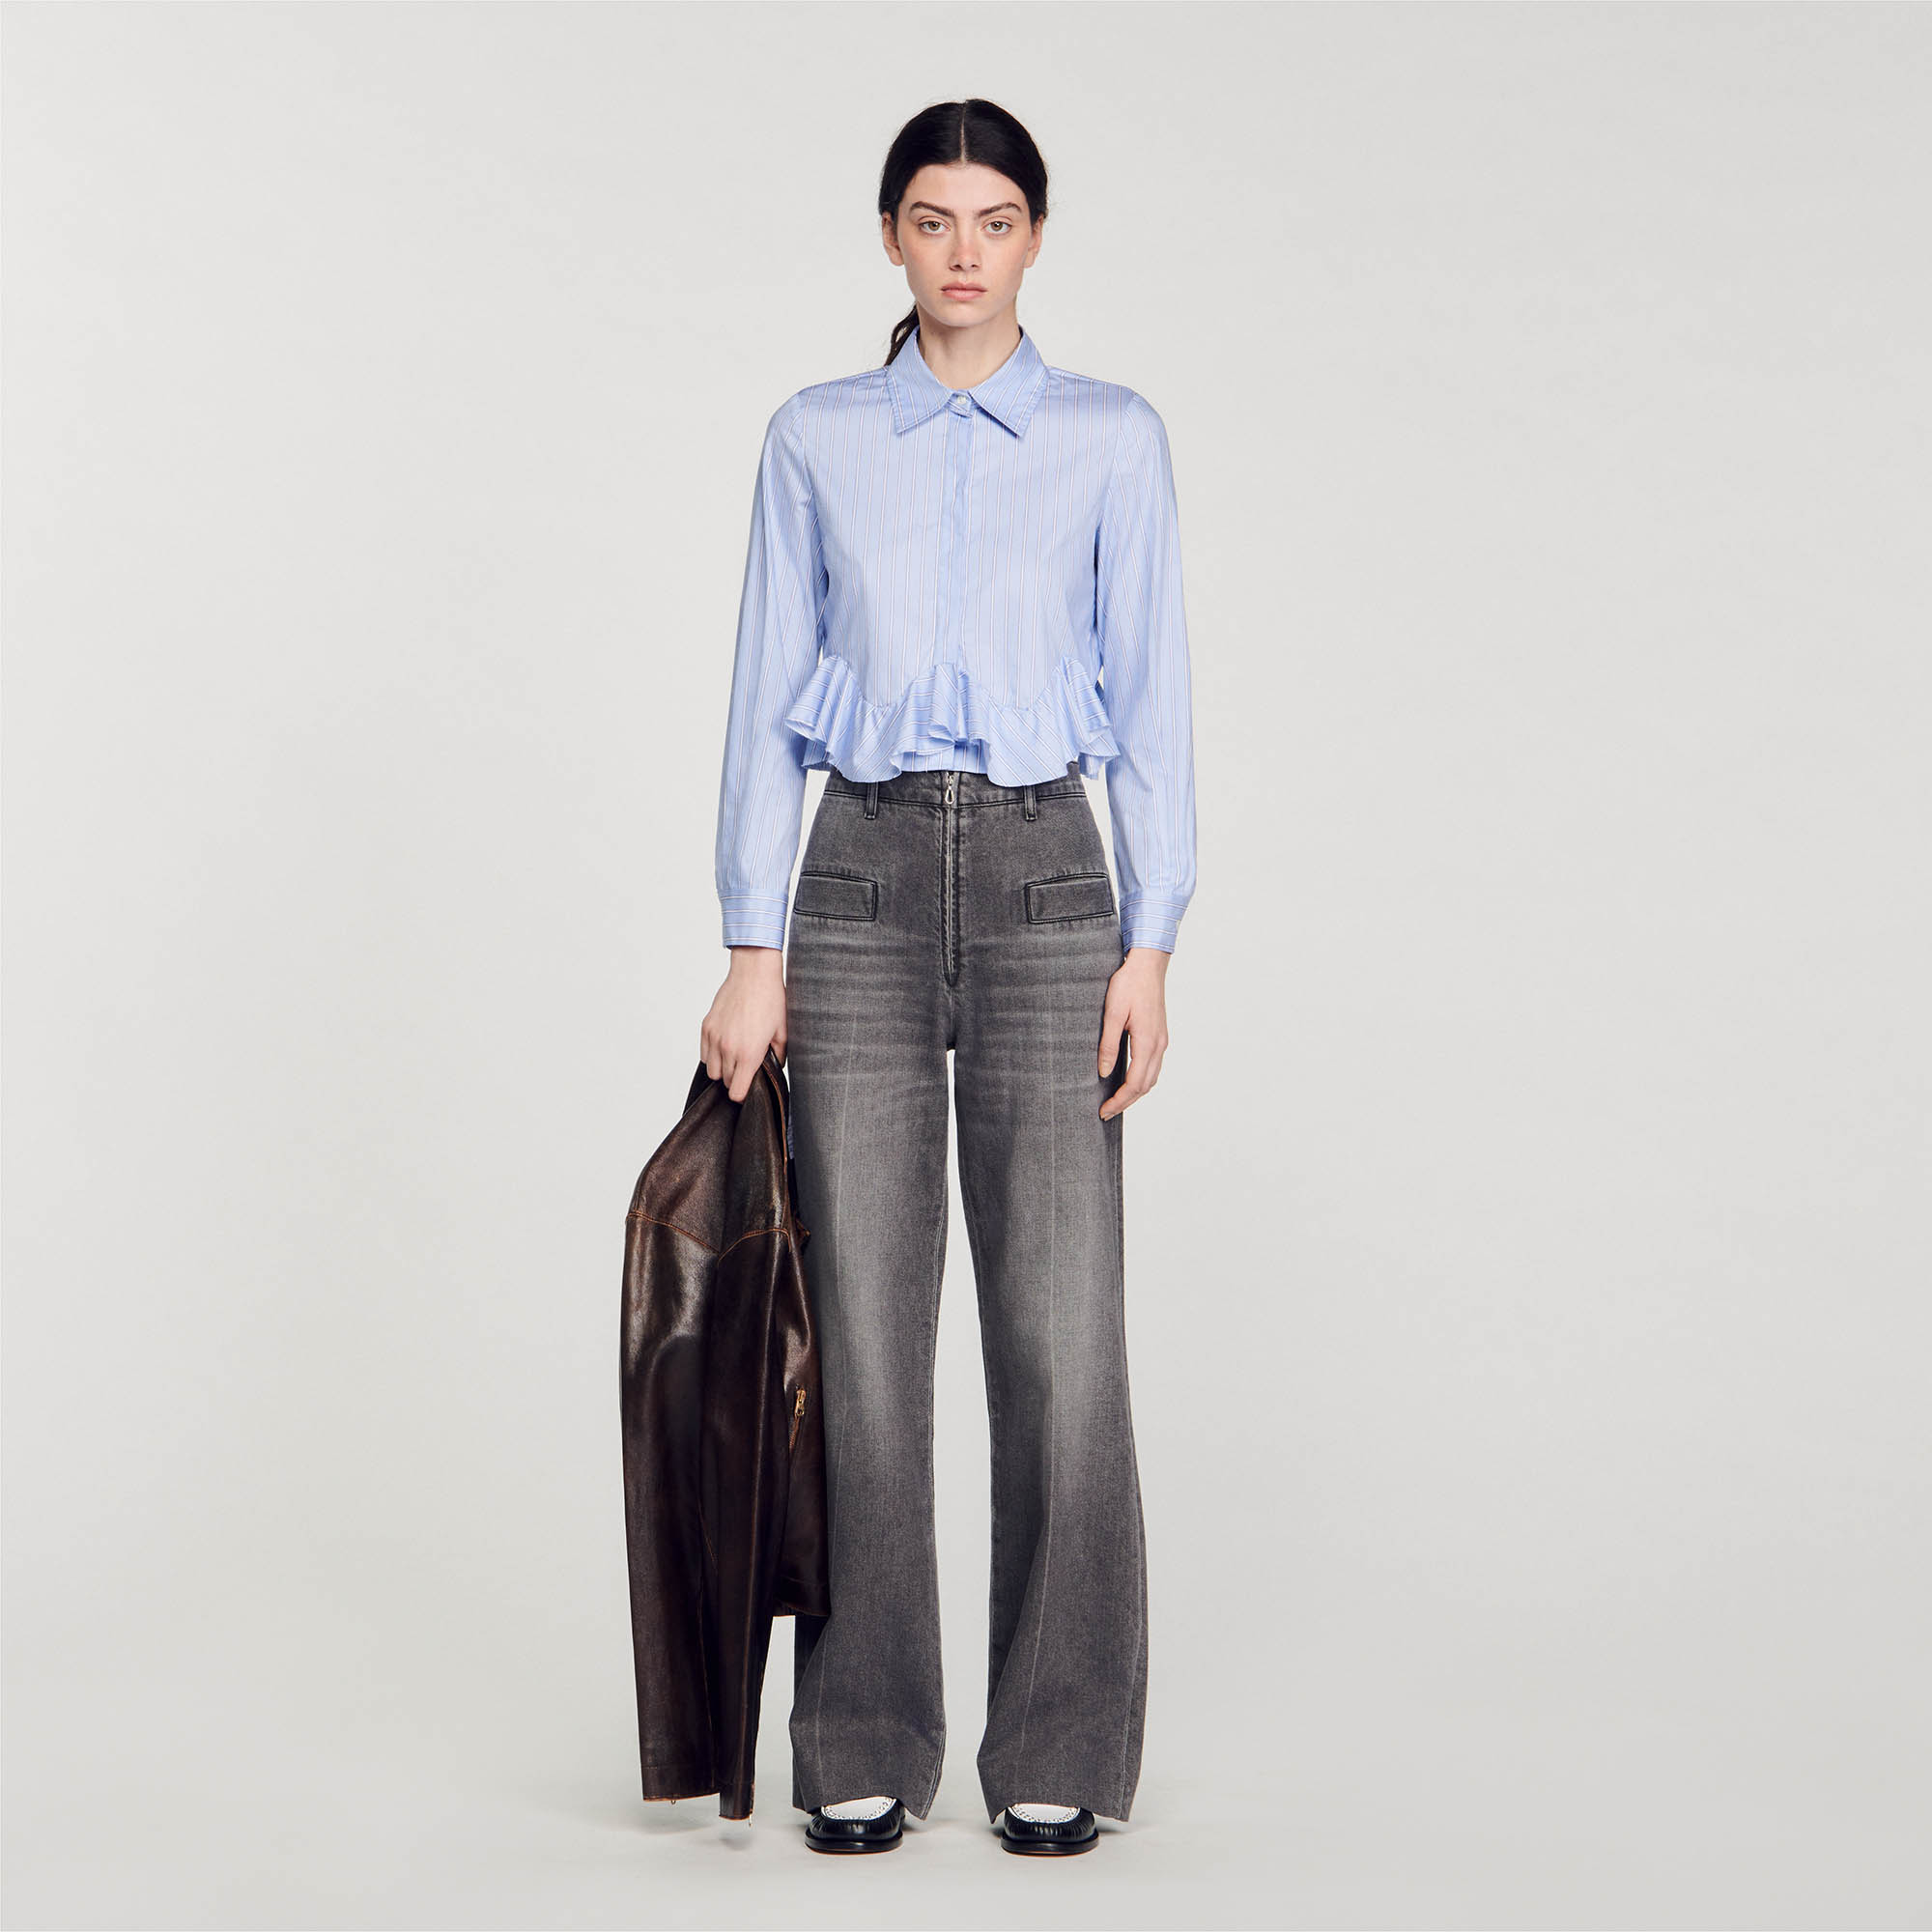 Sandro cotton Buttons: Short shirt in stripy poplin with long sleeves, buttoned cuffs and embellished with ruffles at the waist